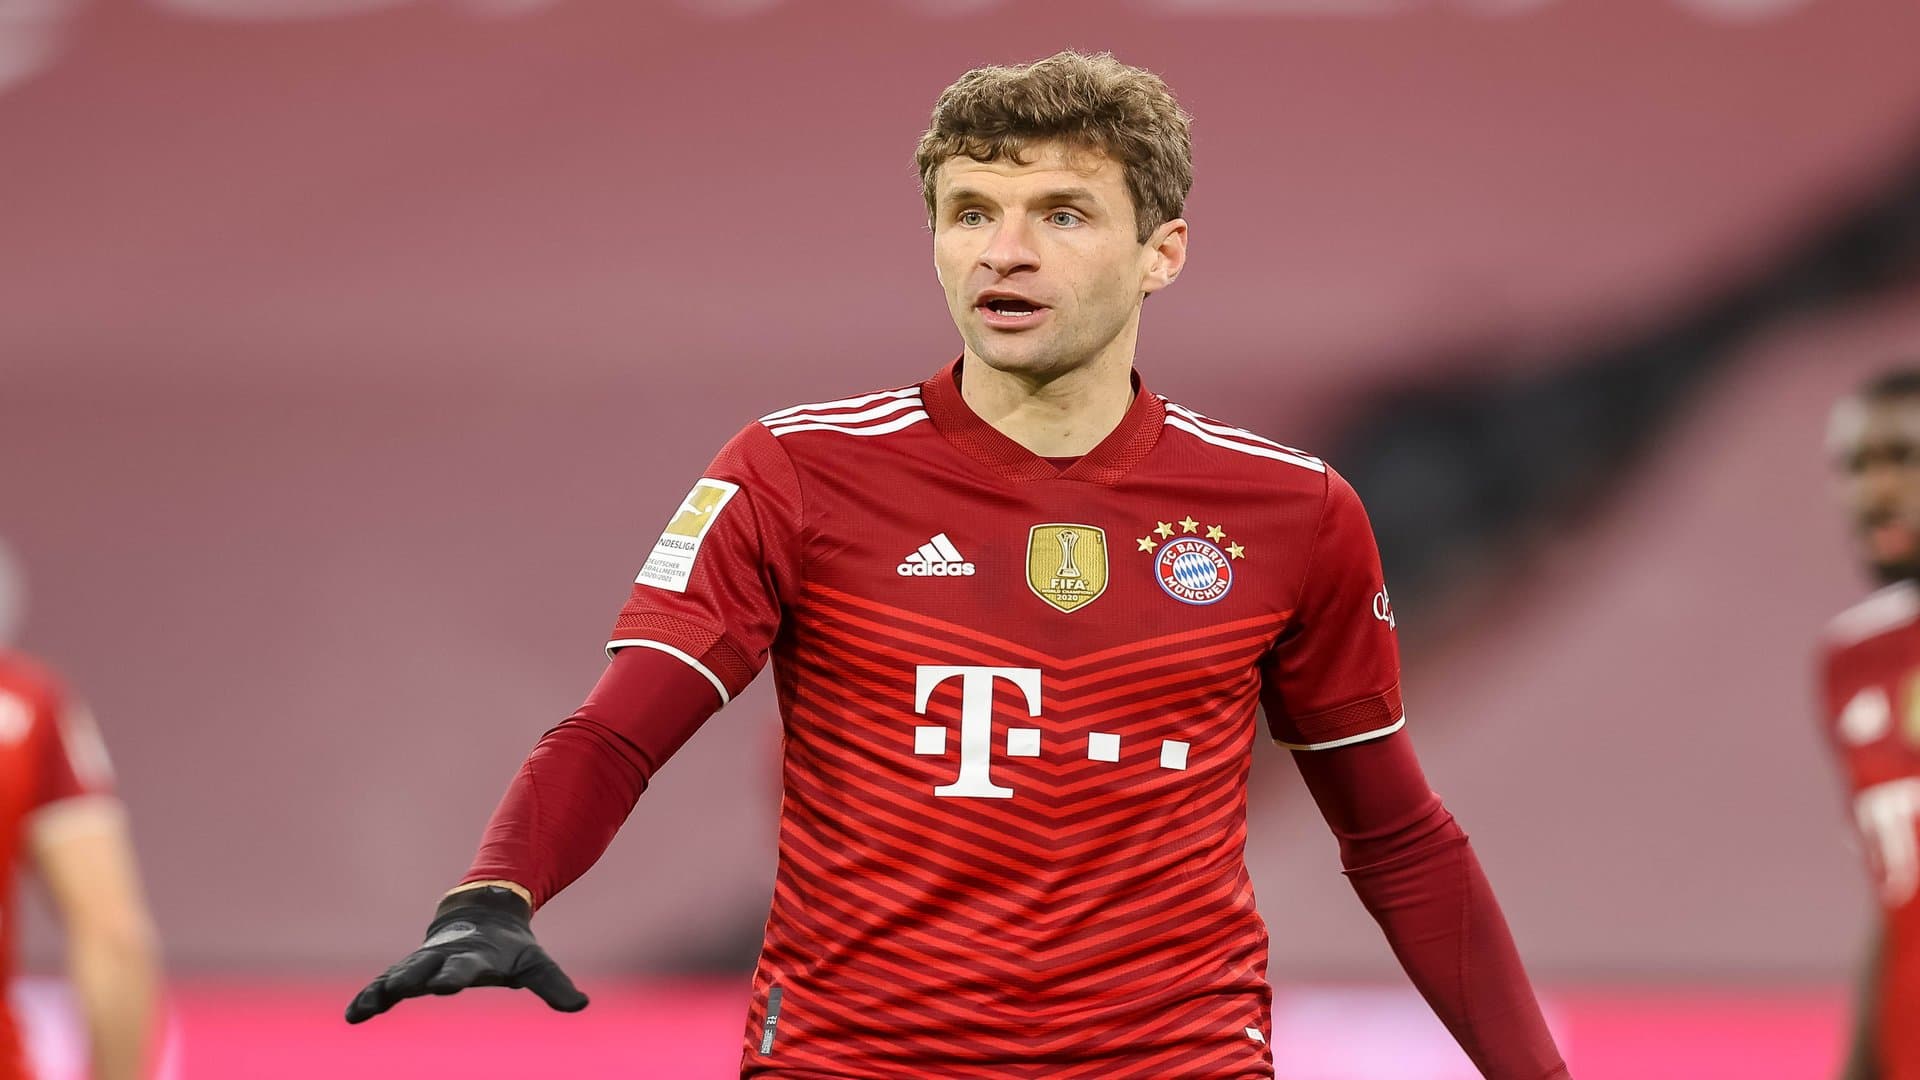 Thomas Muller - The Assist King and the world's best attacking midfielder